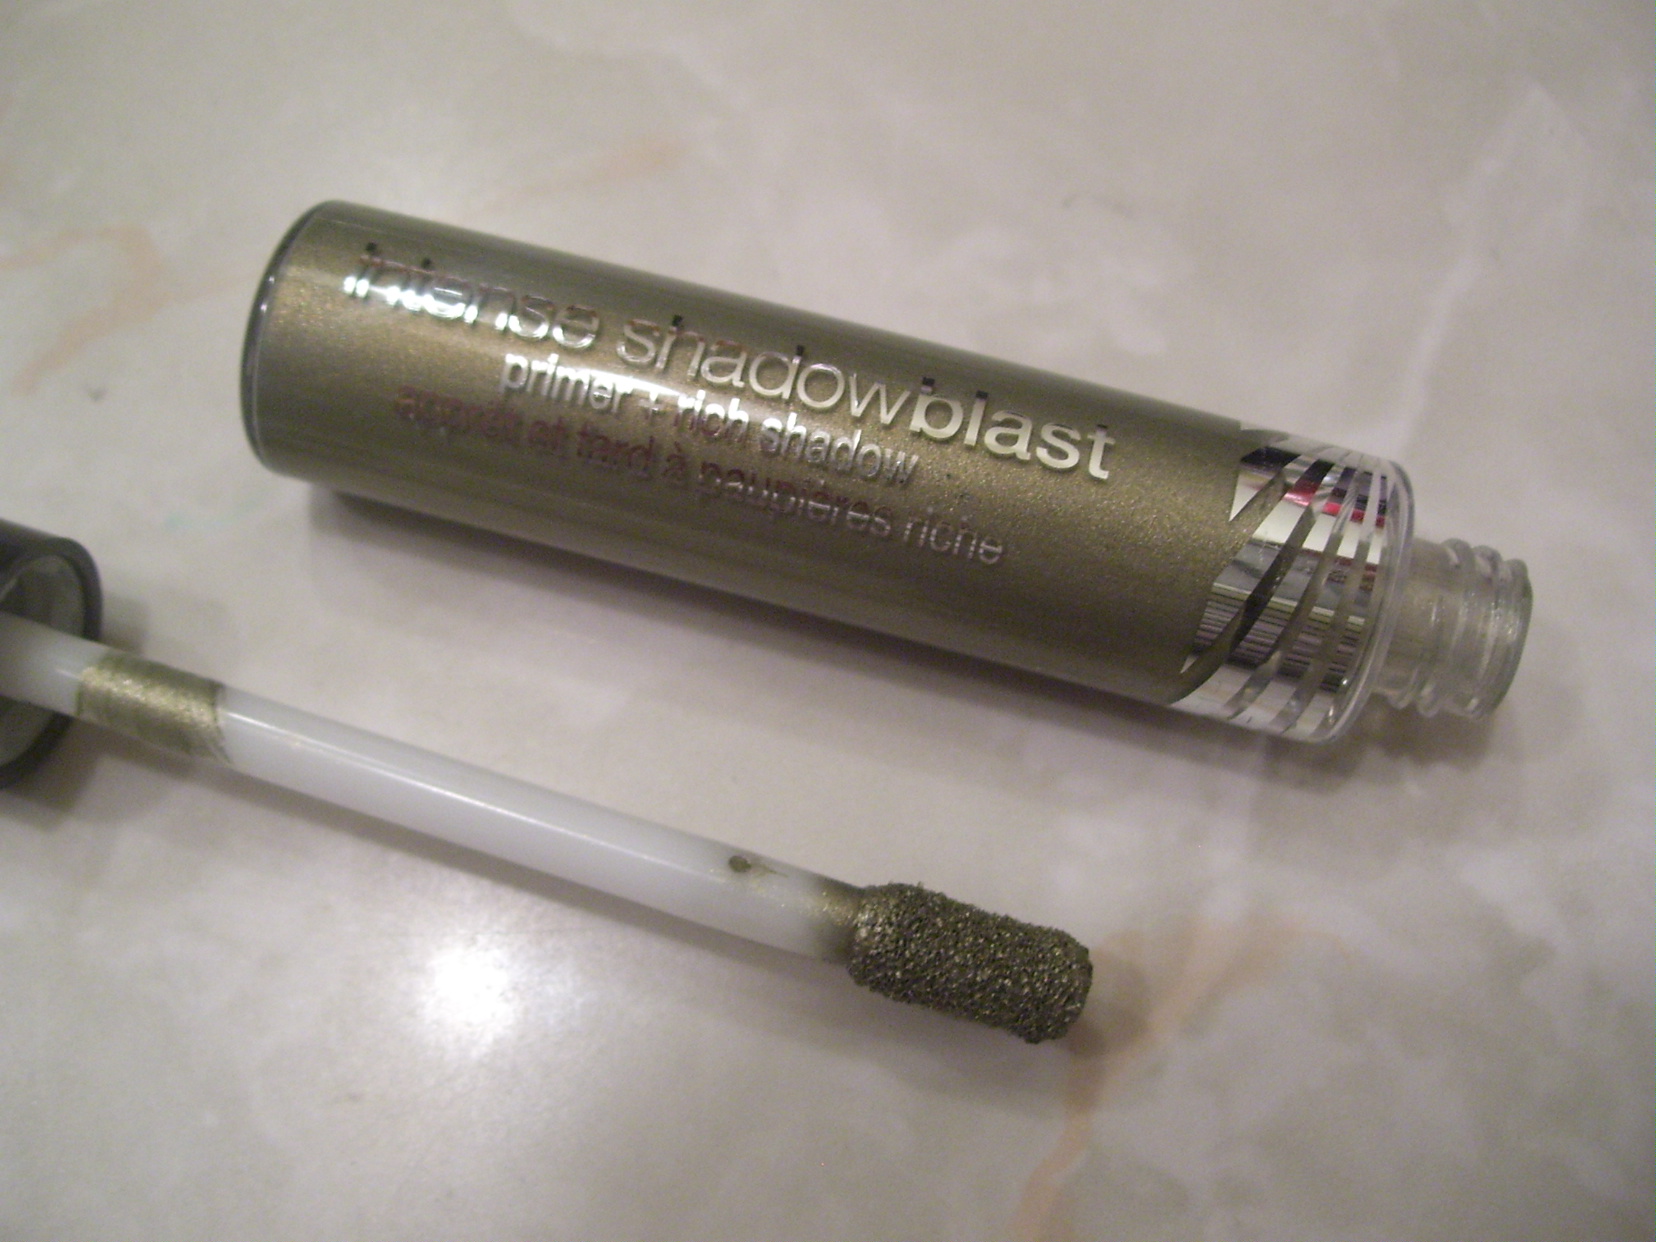 Swatch & Review: Covergirl Intense ShadowBlast – Extreme Green